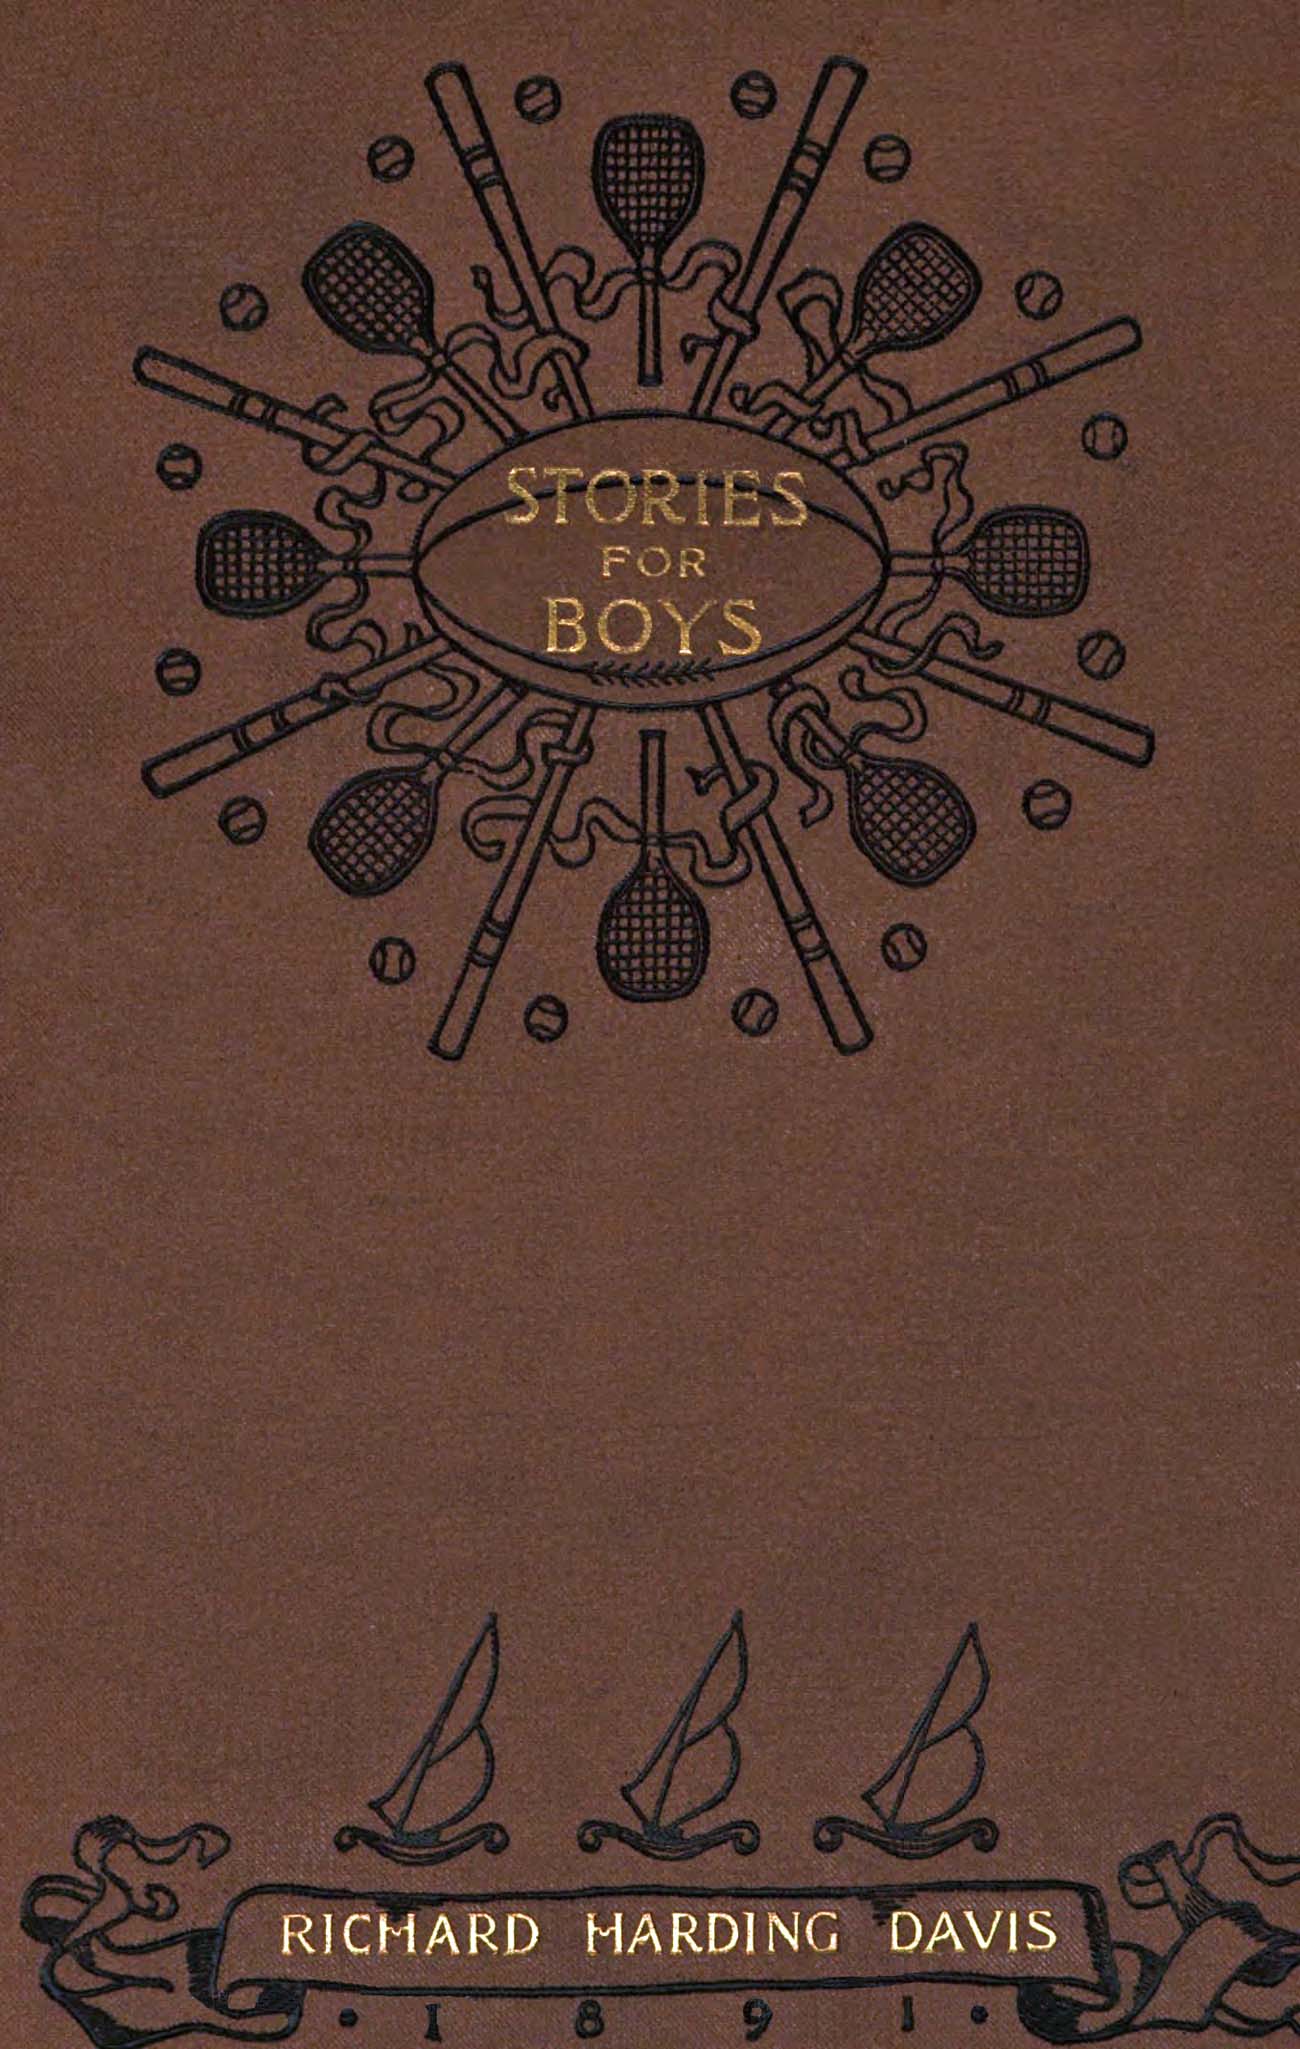 Stories for Boys